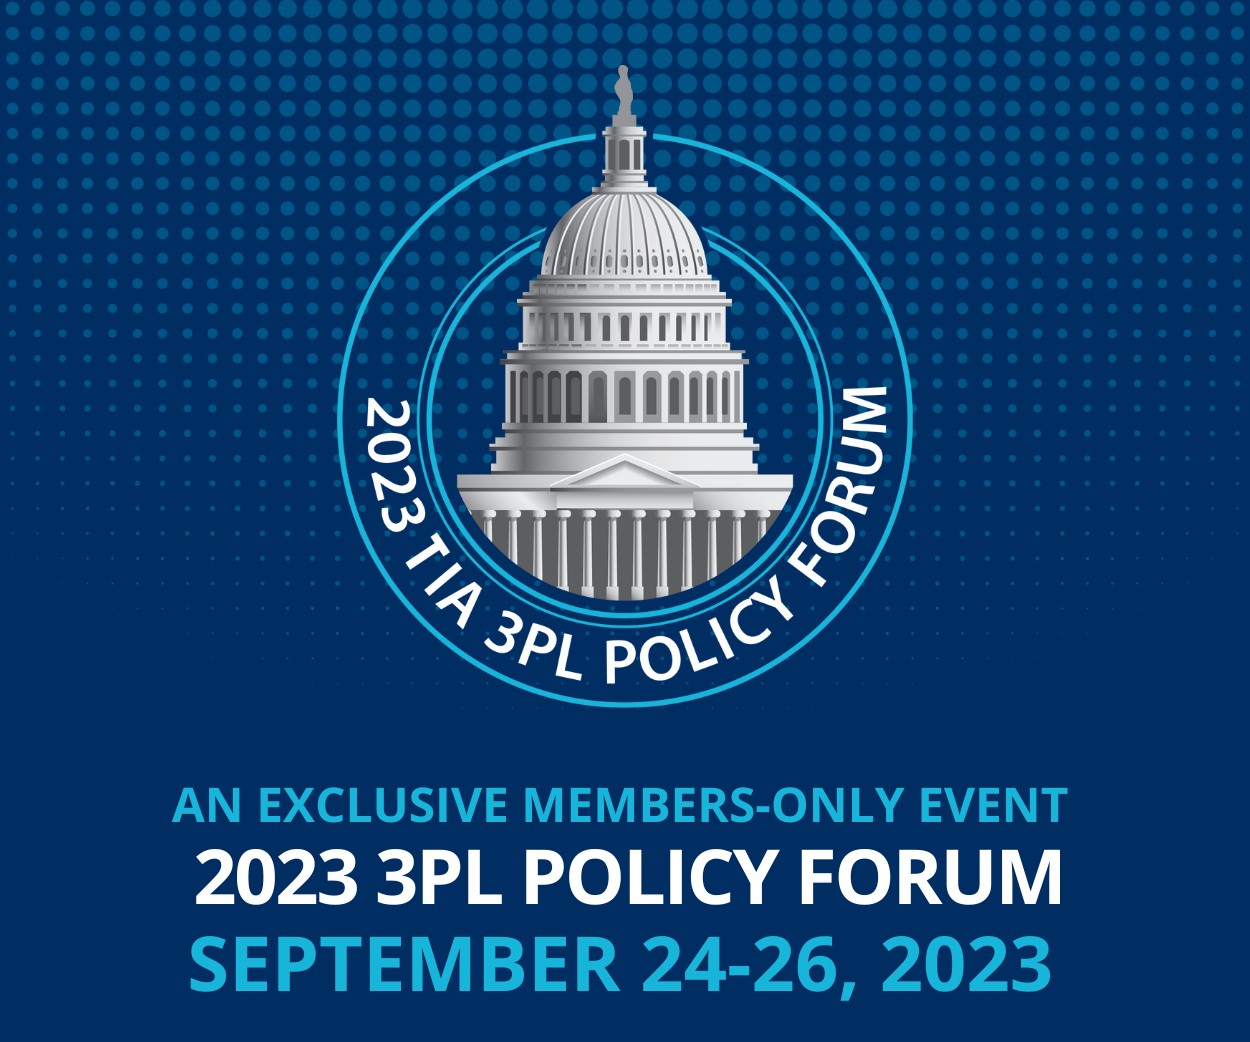 2023 3PL Policy Forum